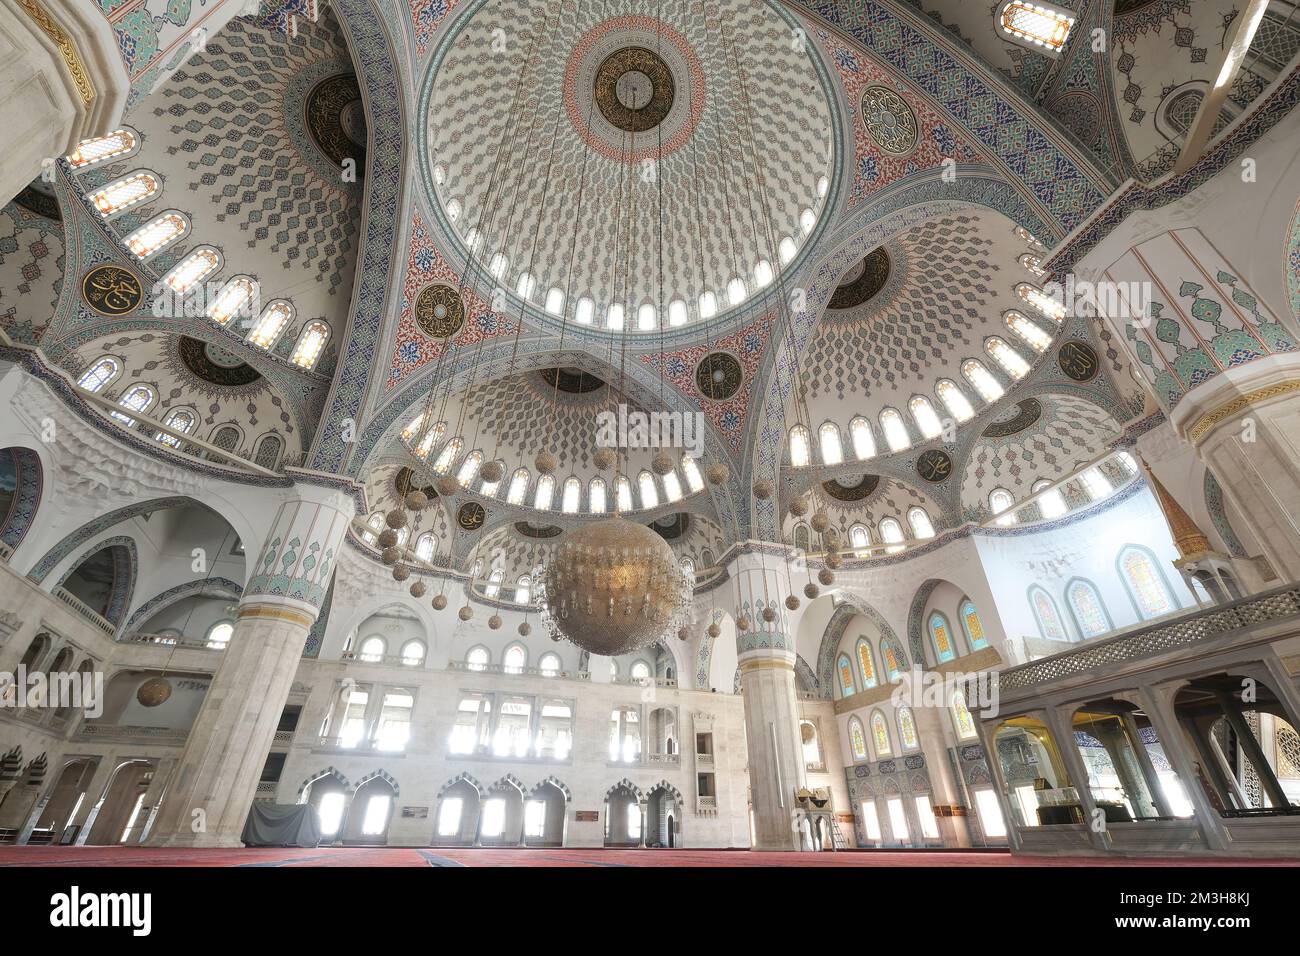 The interior of Kocatepe Mosque the largest mosque in Ankara, Turkey. Stock Photo